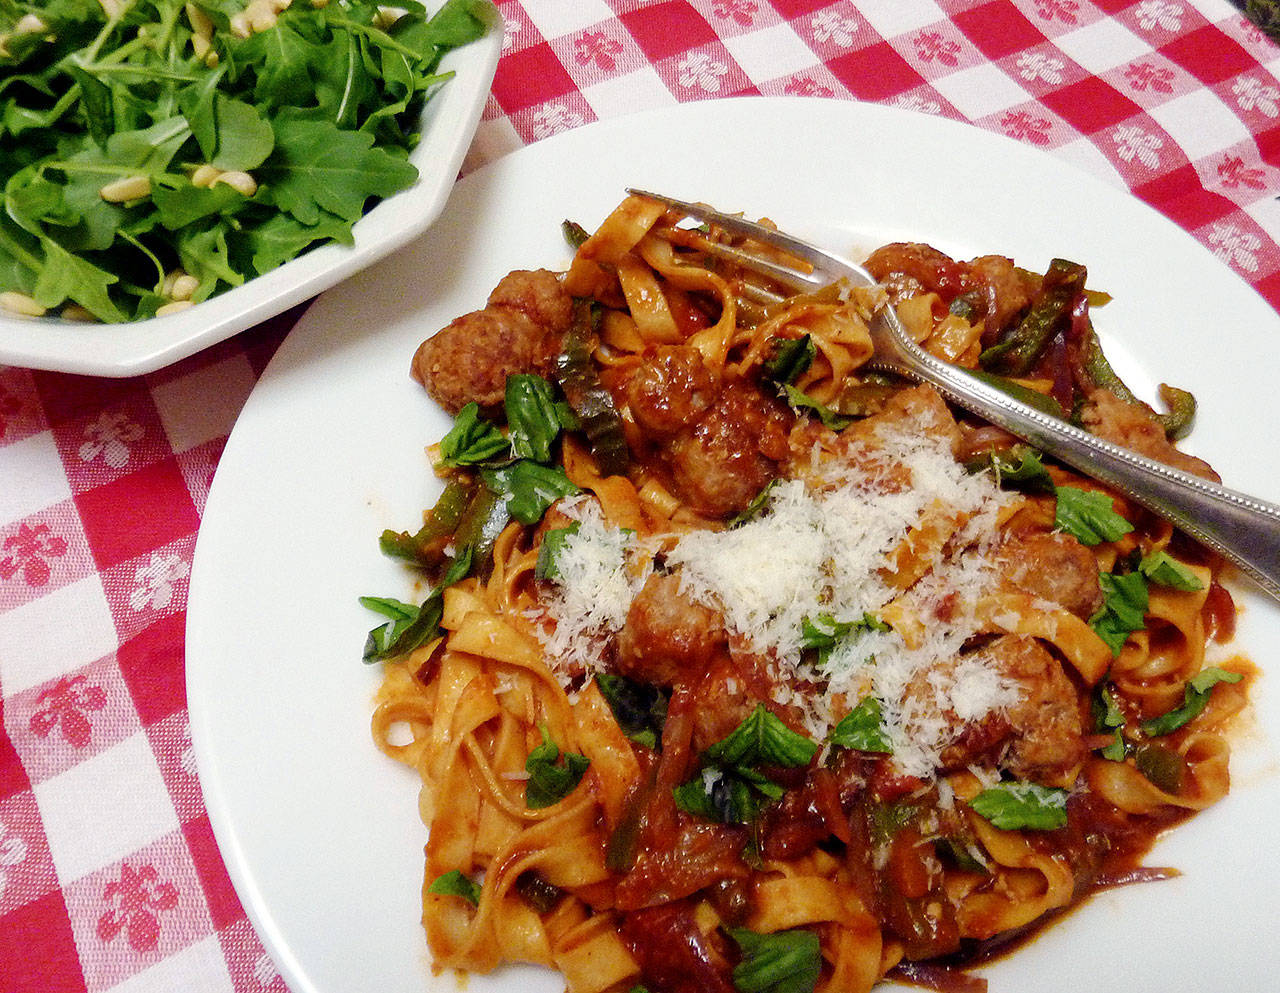 This fettuccini dish features pepper, onion and sausage in pasta sauce. (Linda Gassenheimer / TNS)